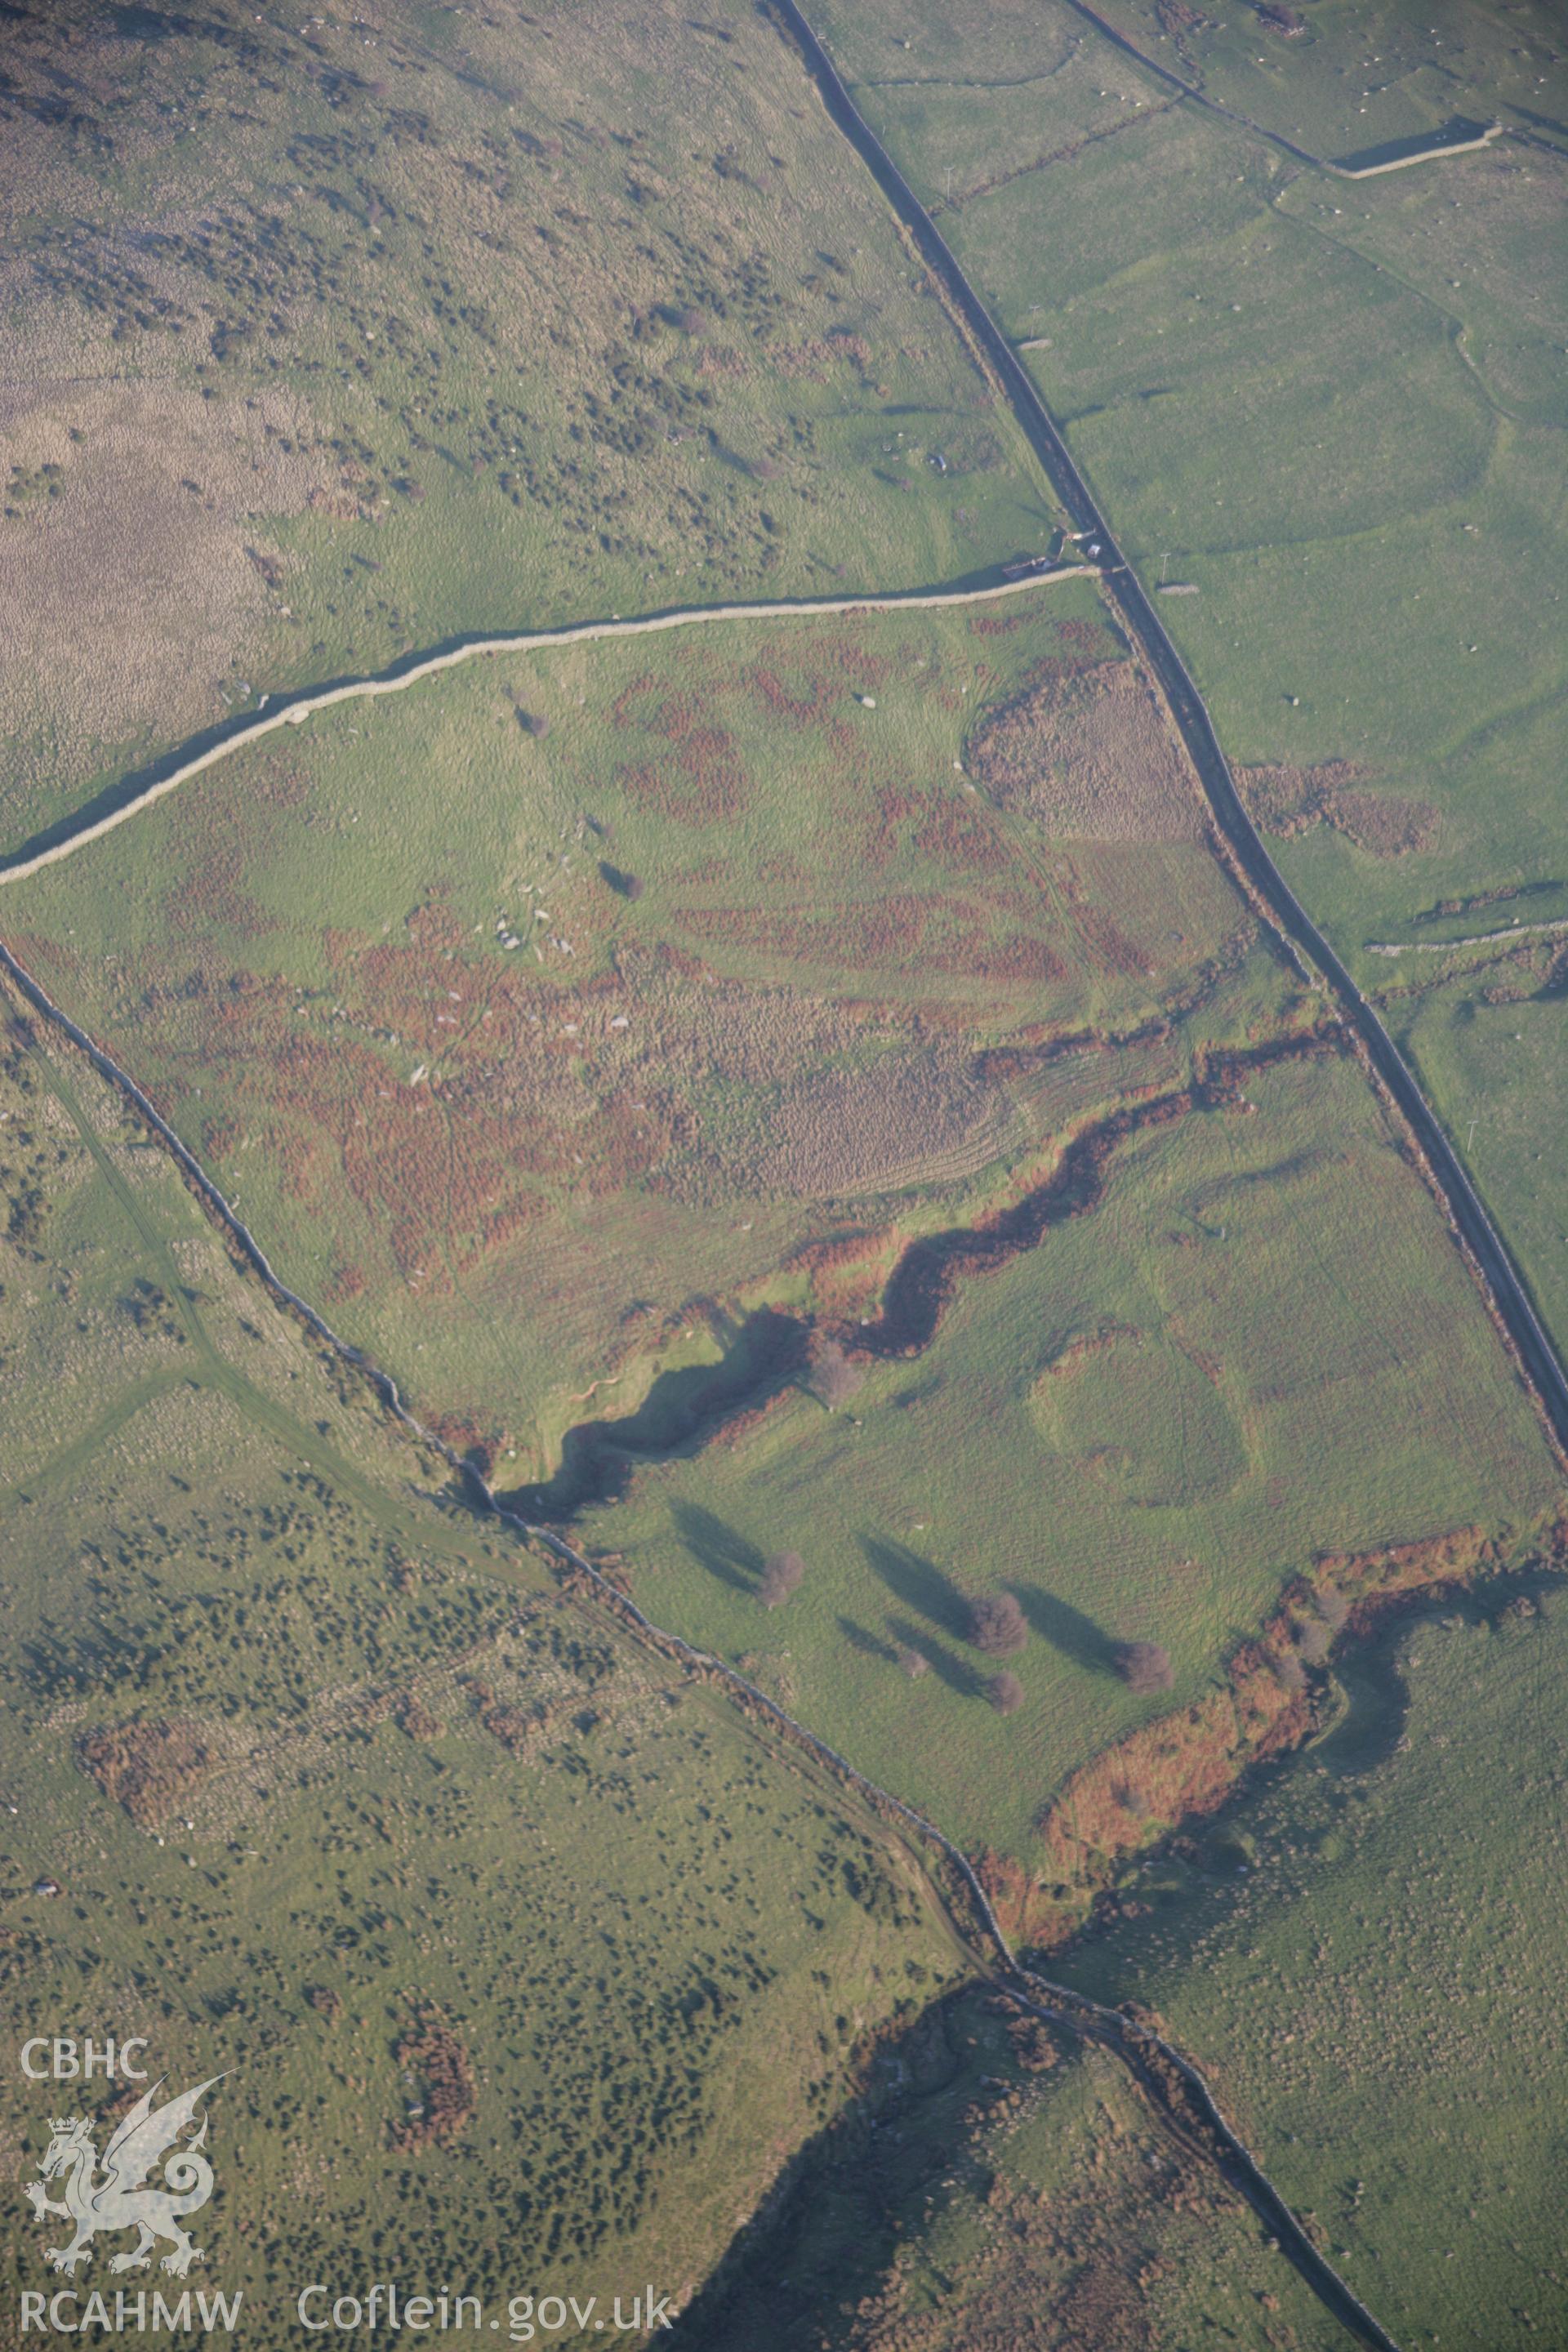 RCAHMW colour oblique aerial photograph of a homestead near Maen-y-Bardd viewed from the west. Taken on 21 November 2005 by Toby Driver